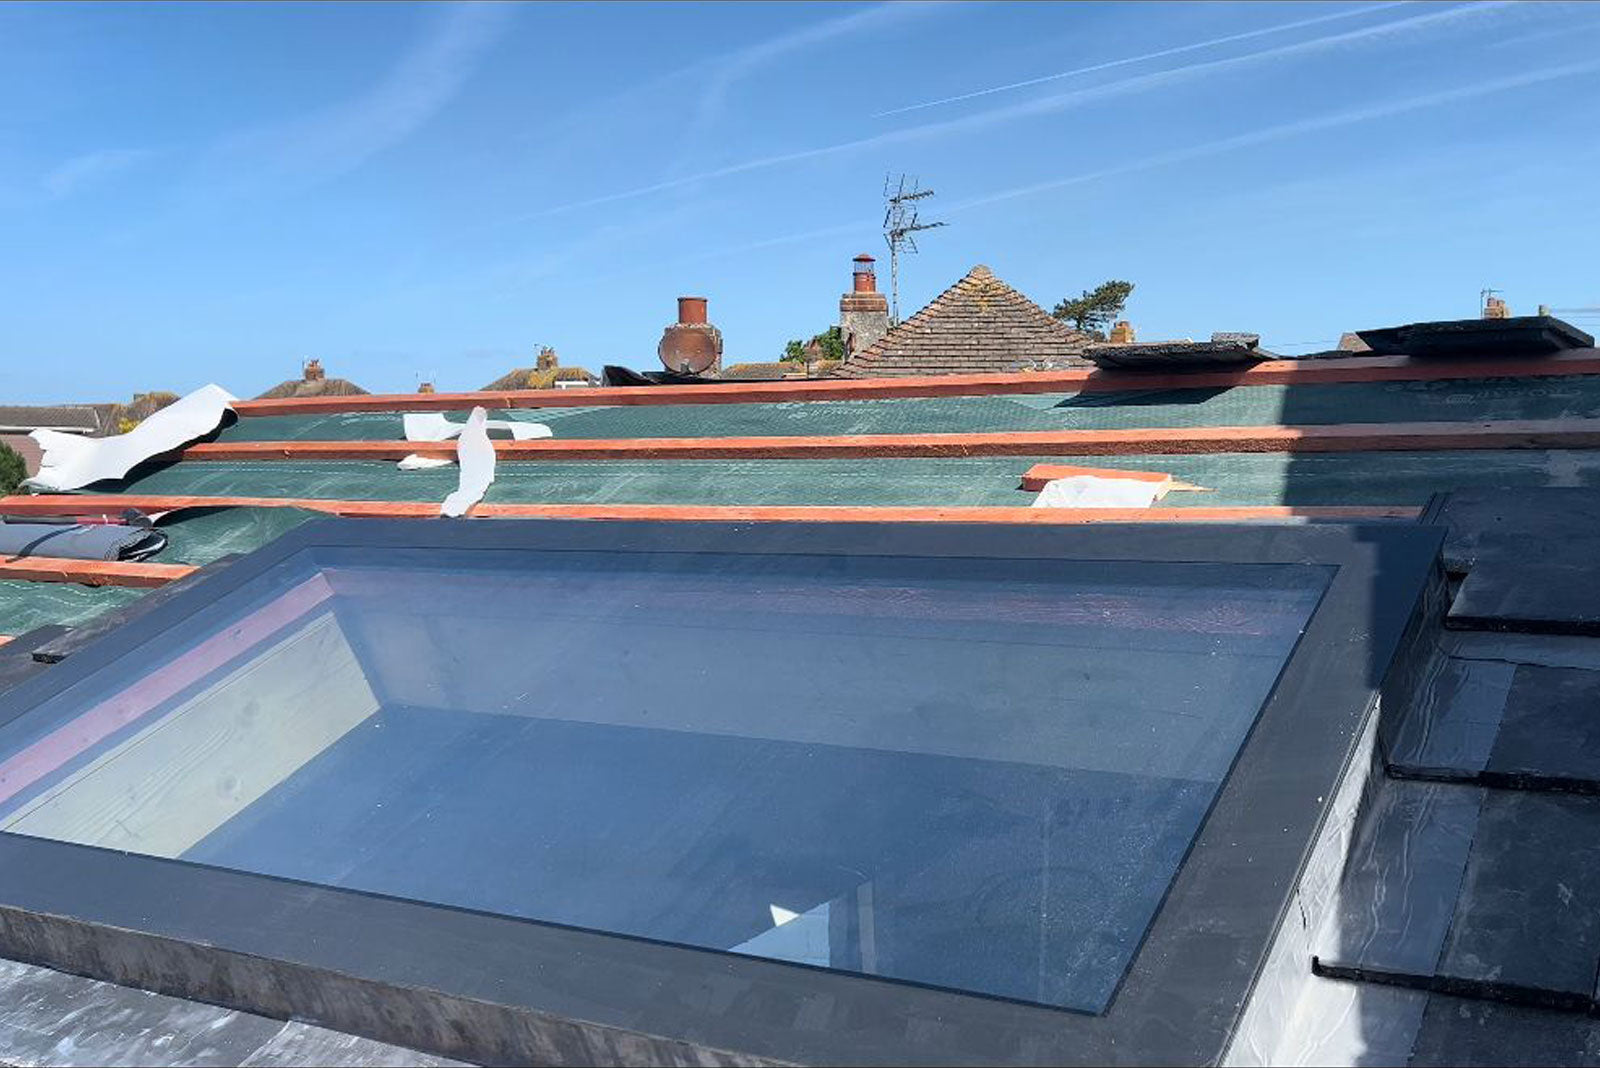 Pitched Roof Skylight 1000 x 1500mm